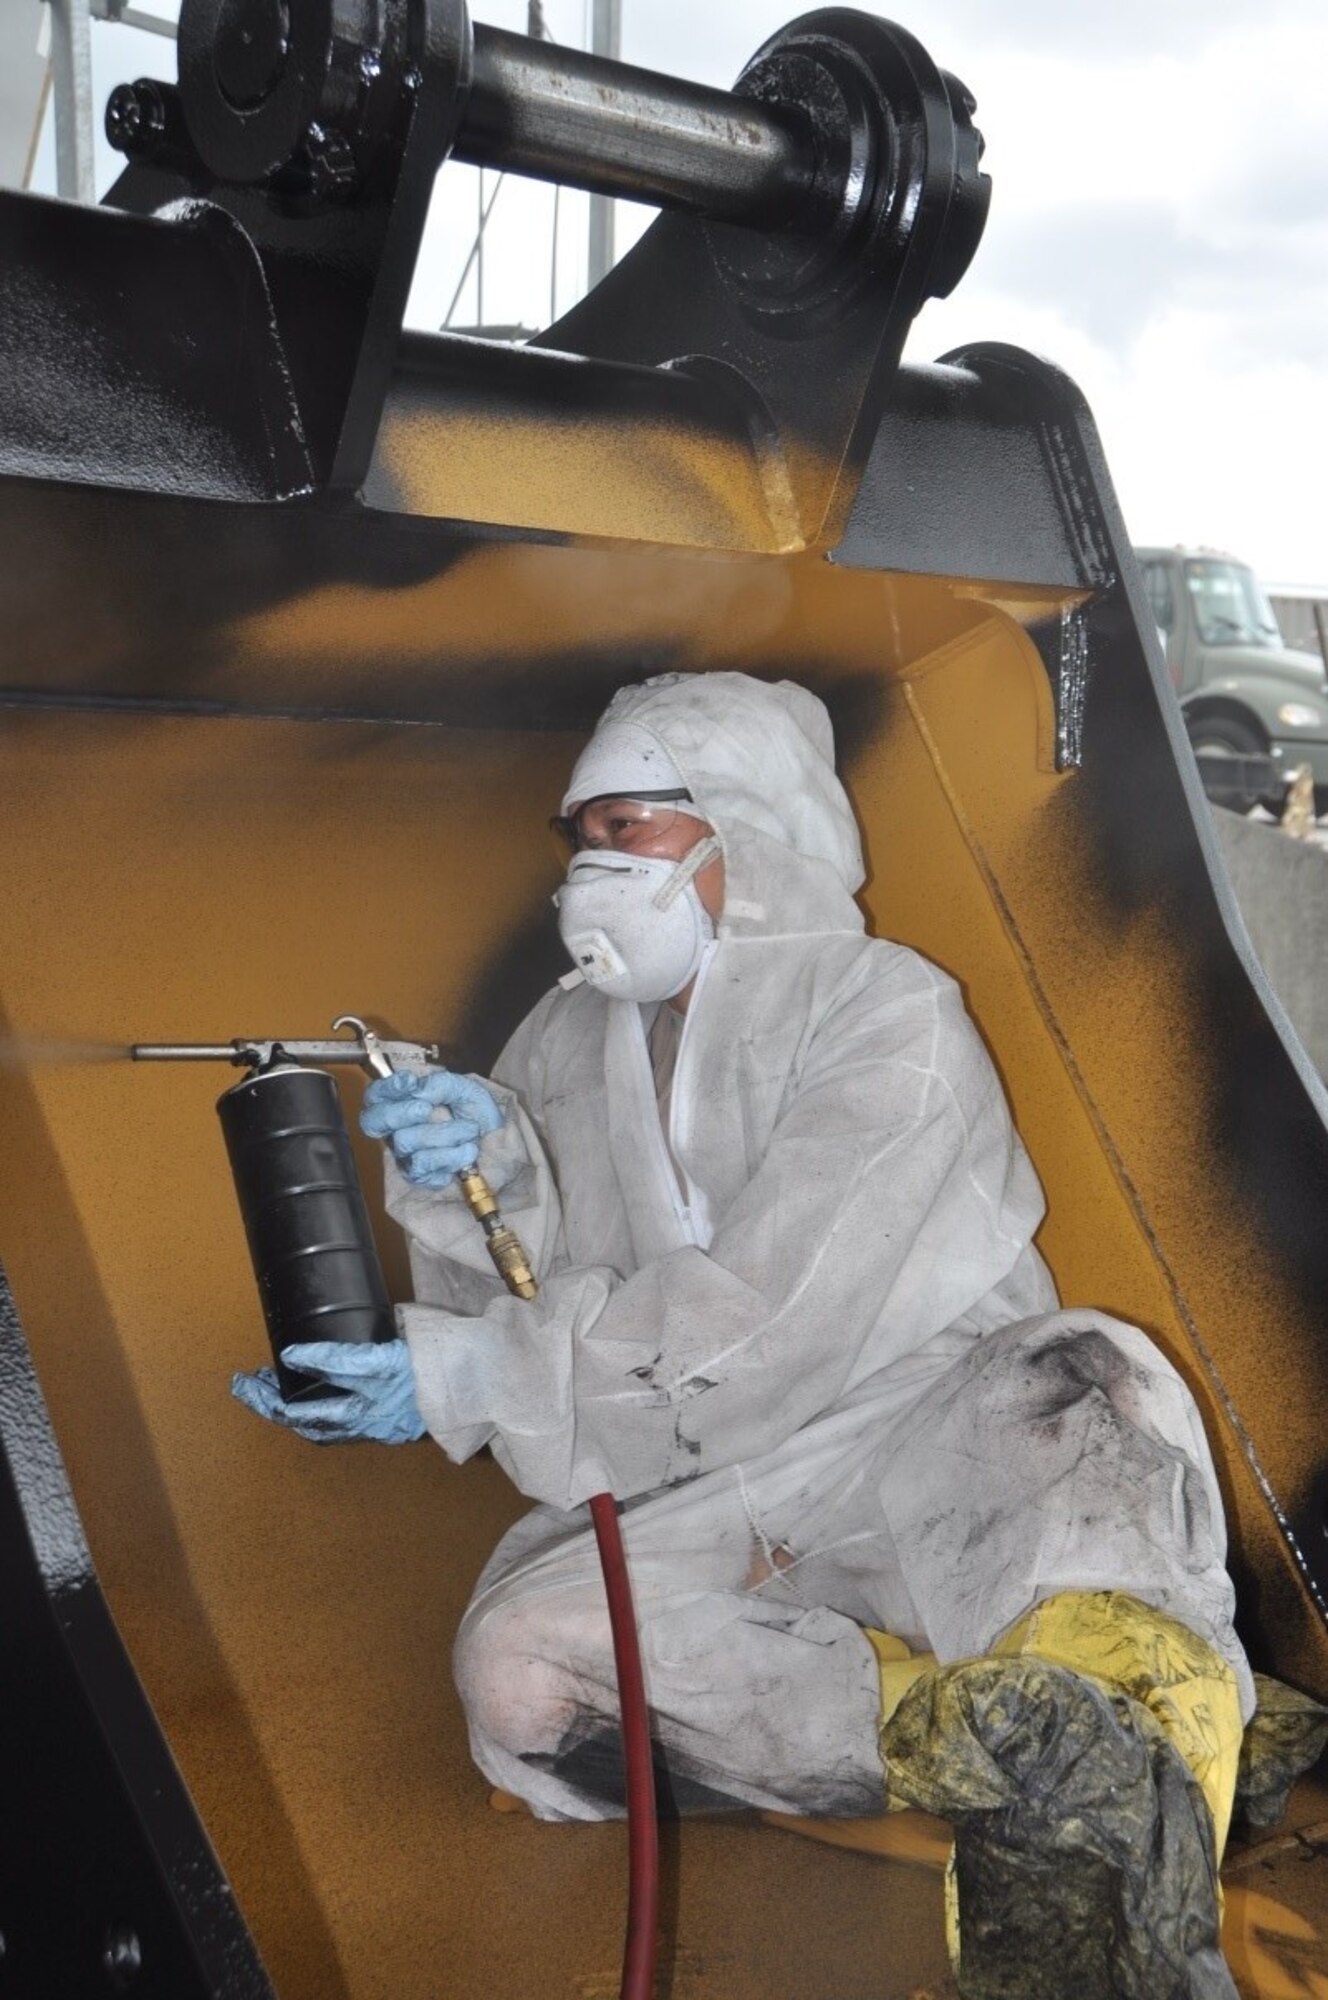 Staff Sgt. Amber Melgoza-Kulesza, 944th Logistics Readiness Squadron Fuels section, endures extremely high temperatures and humidity, while spraying corrosive preventive compound on Airfield Damage Repair construction equipment at Kadena Air Base, Japan, June 30, 2016. The ADR program has 250 assets on reserve and ready for any airfield disaster. This spray process saves 3.5 million dollars every five years in vehicle maintenance repair cost. Citizen Airmen with Luke’s 944th LRS travelled to Kadena as part of their annual tour to provide extra manning for their active-duty counterparts. 